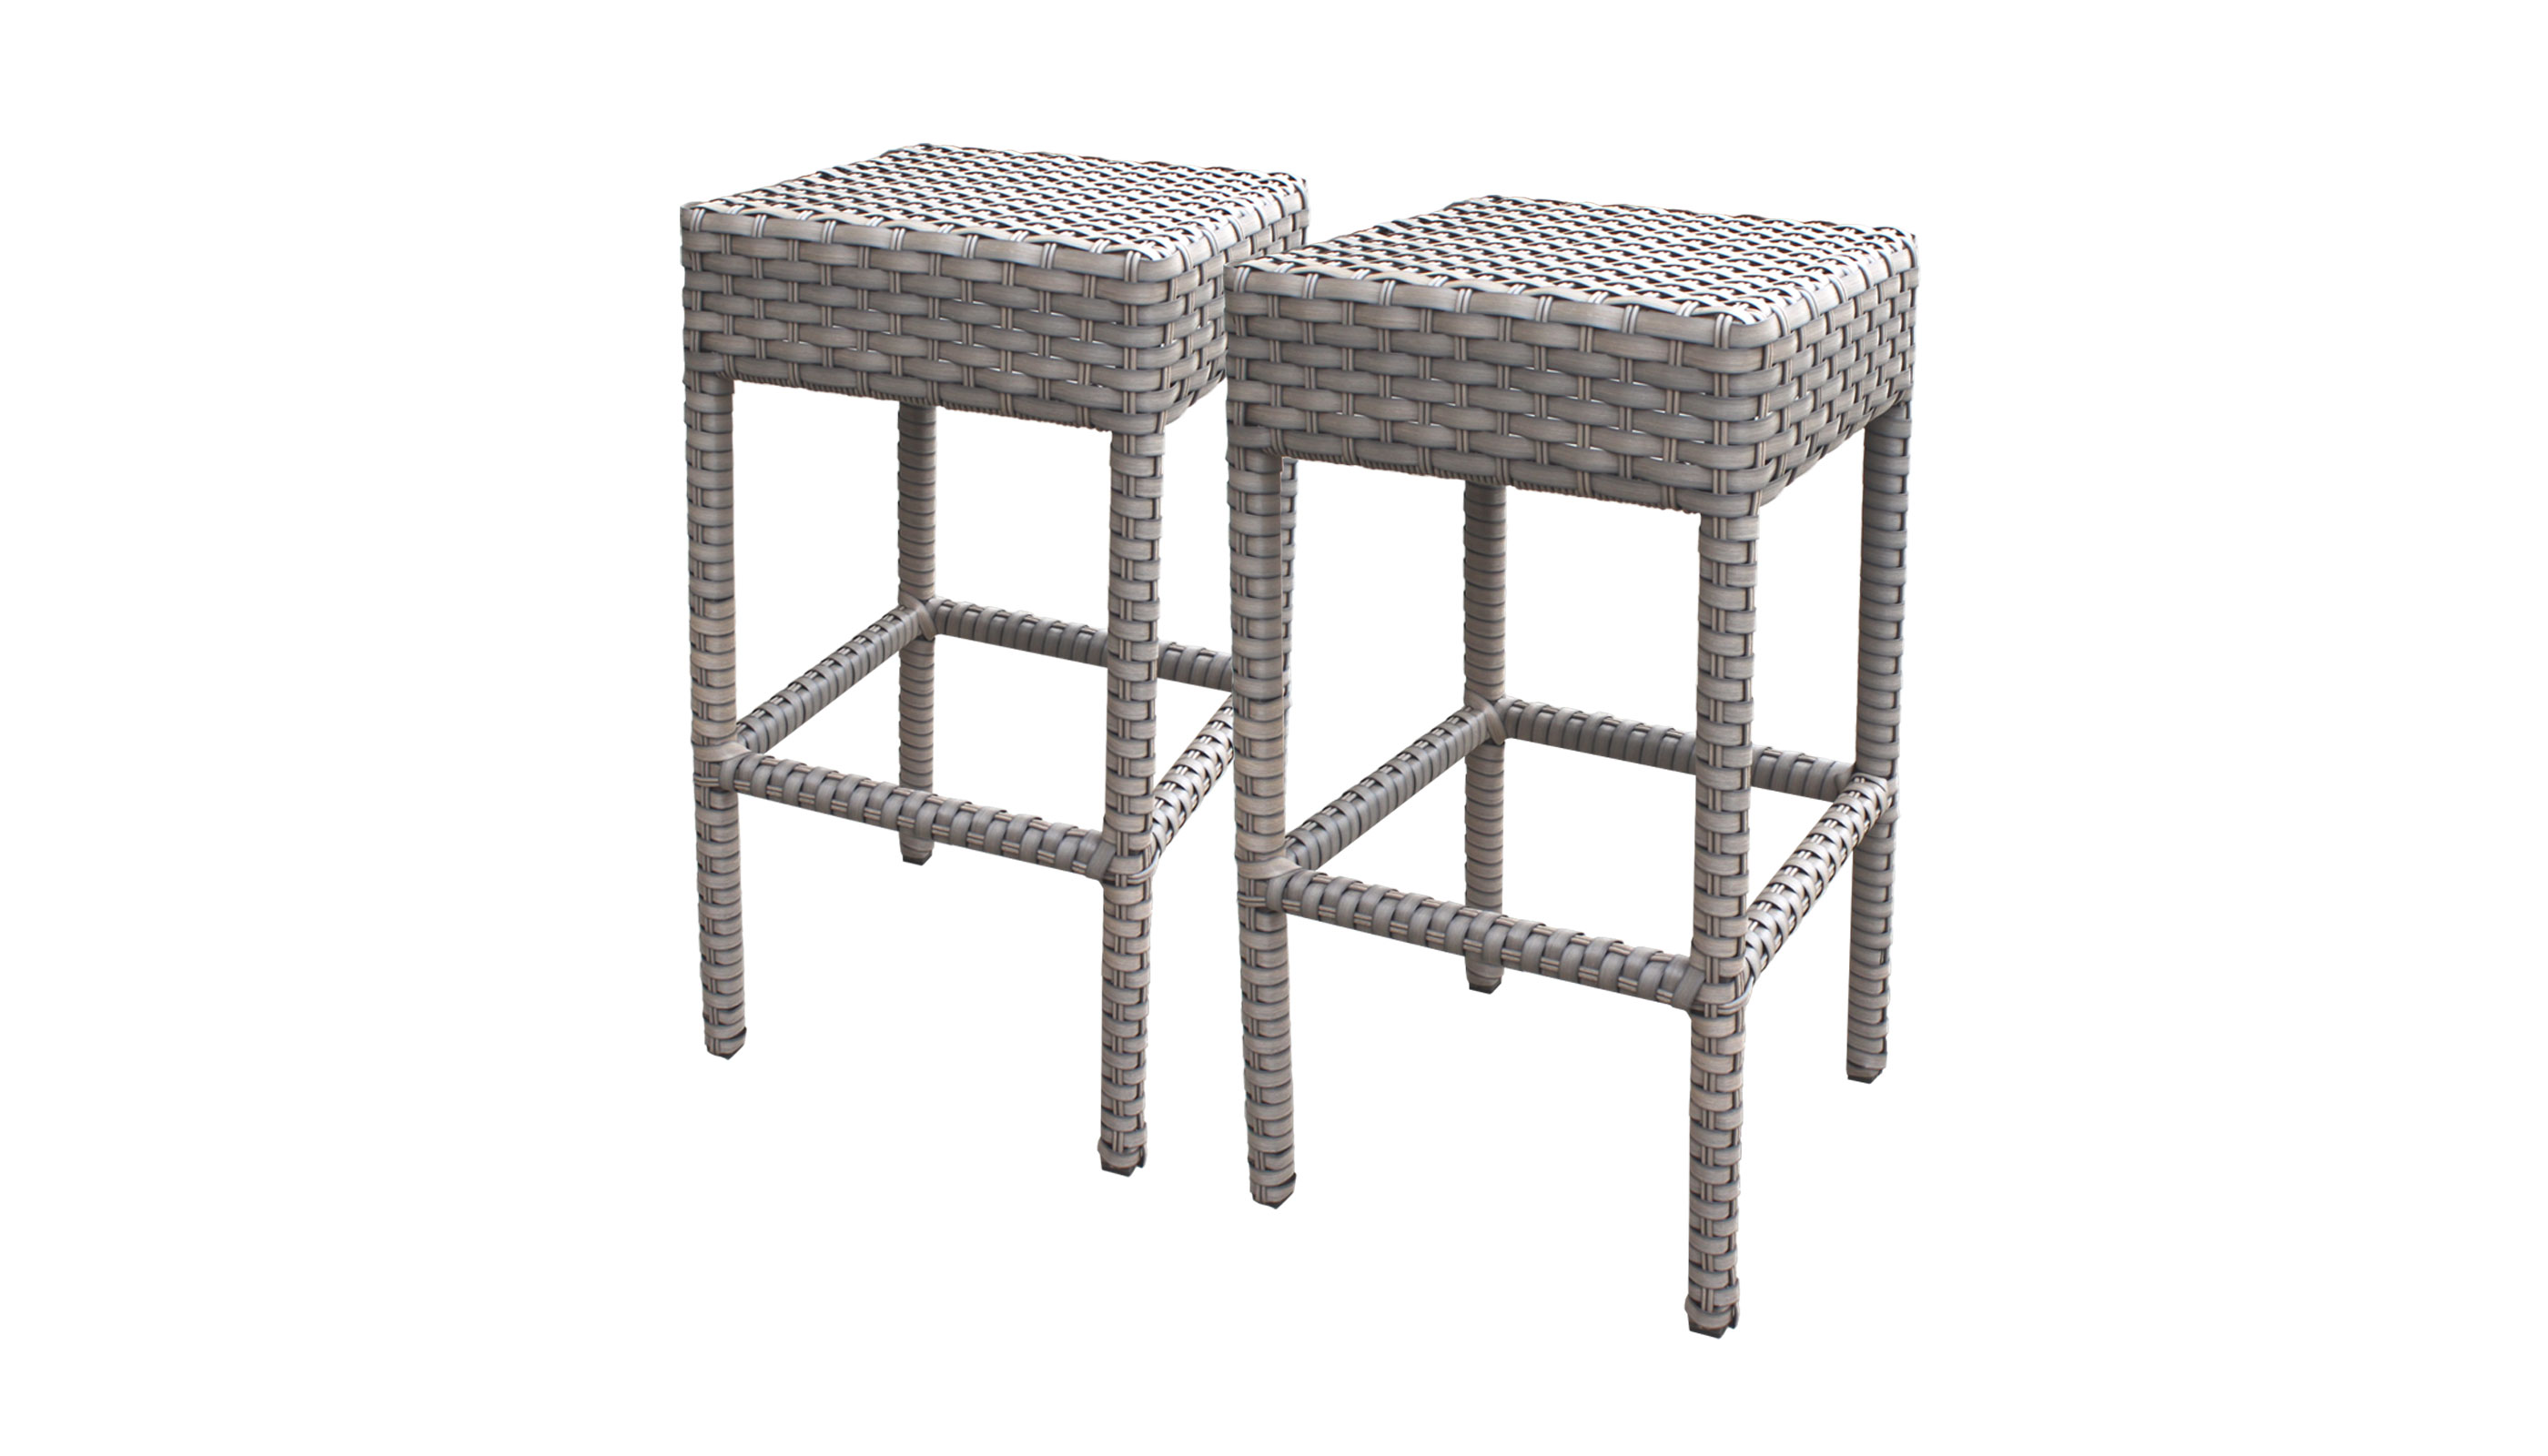 Monterey Bar Table Set with Cart, Basket, and 4 Backless Barstools 7 Piece Outdoor Wicker Patio Furniture - TK Classics